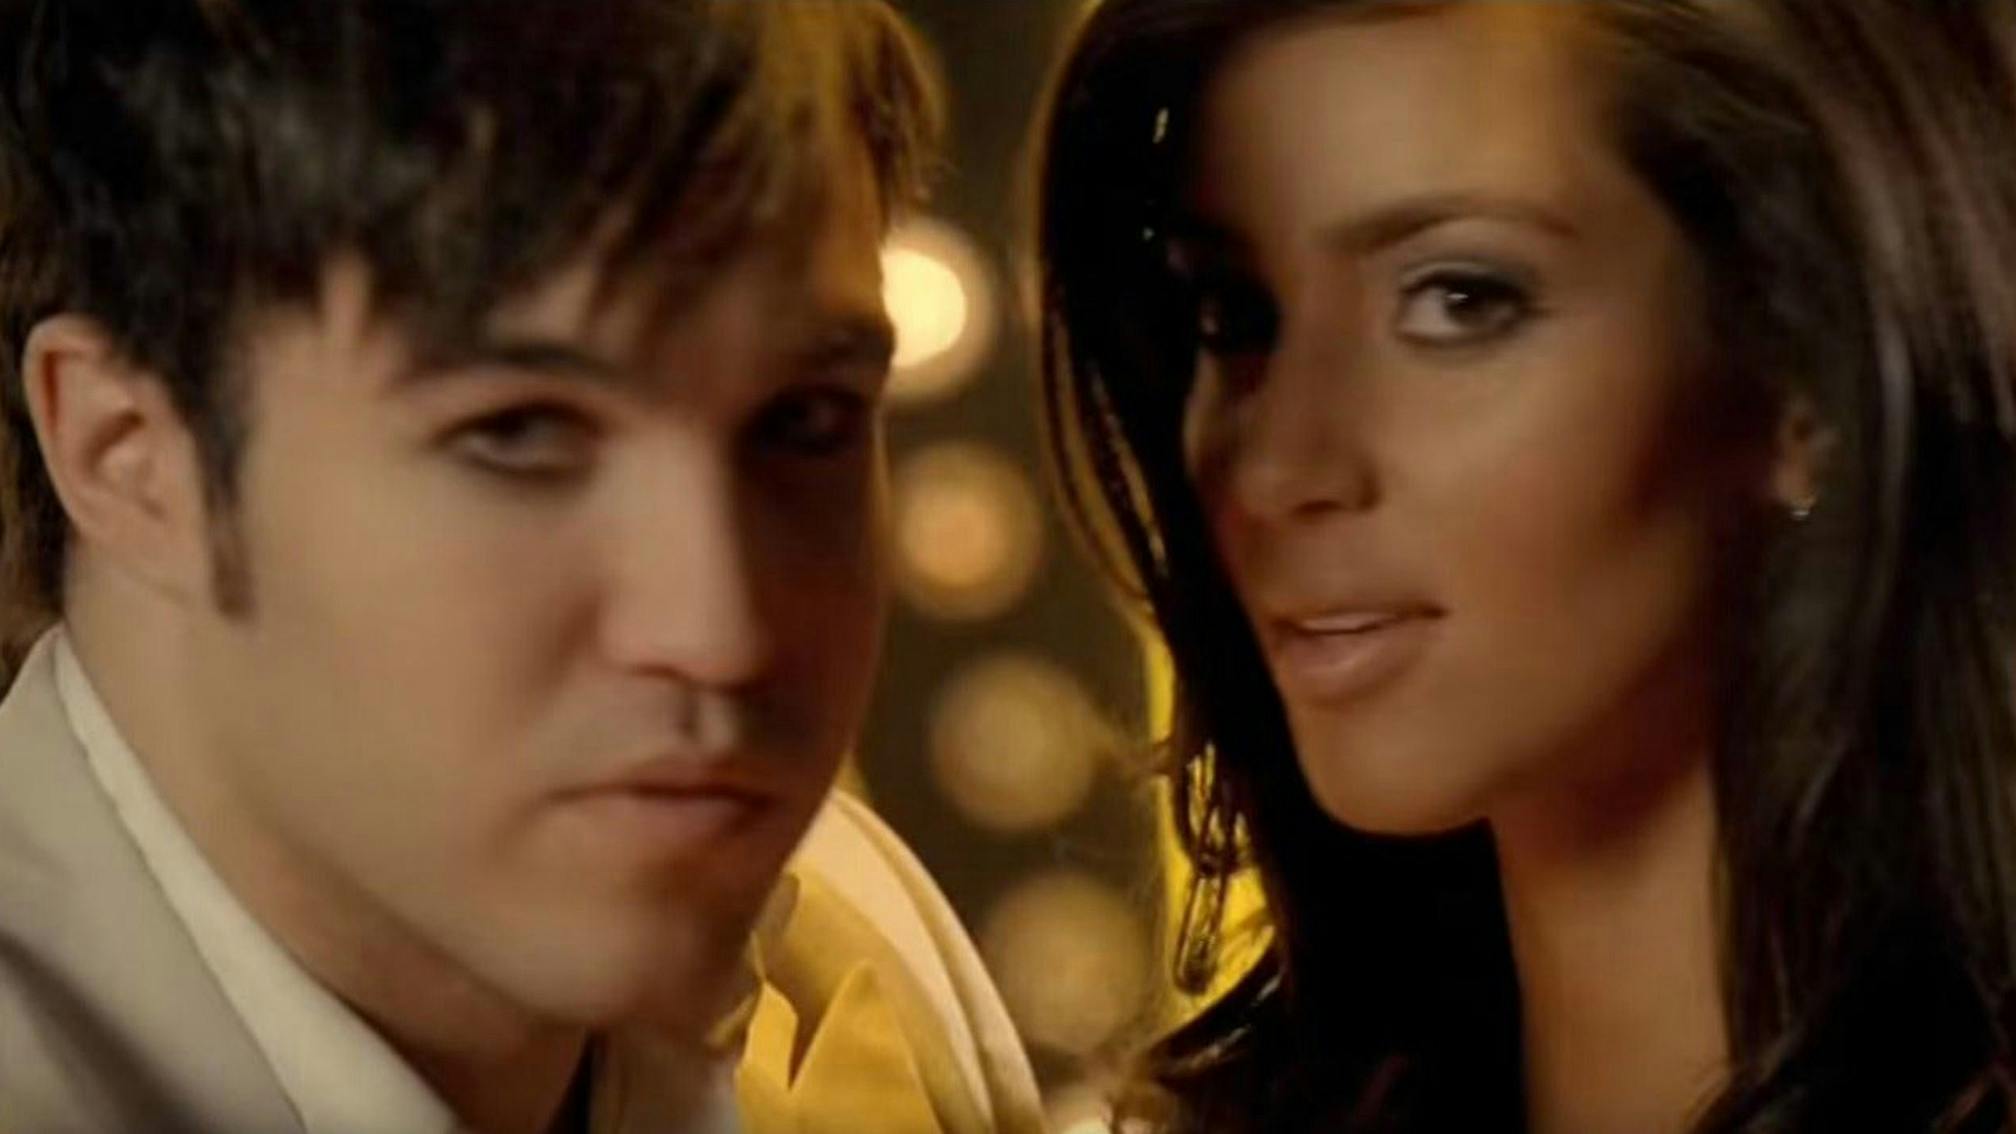 Pete Wentz reflects on Kim Kardashian's appearance in Fall Out Boy's Thnks Fr Th Mmrs video